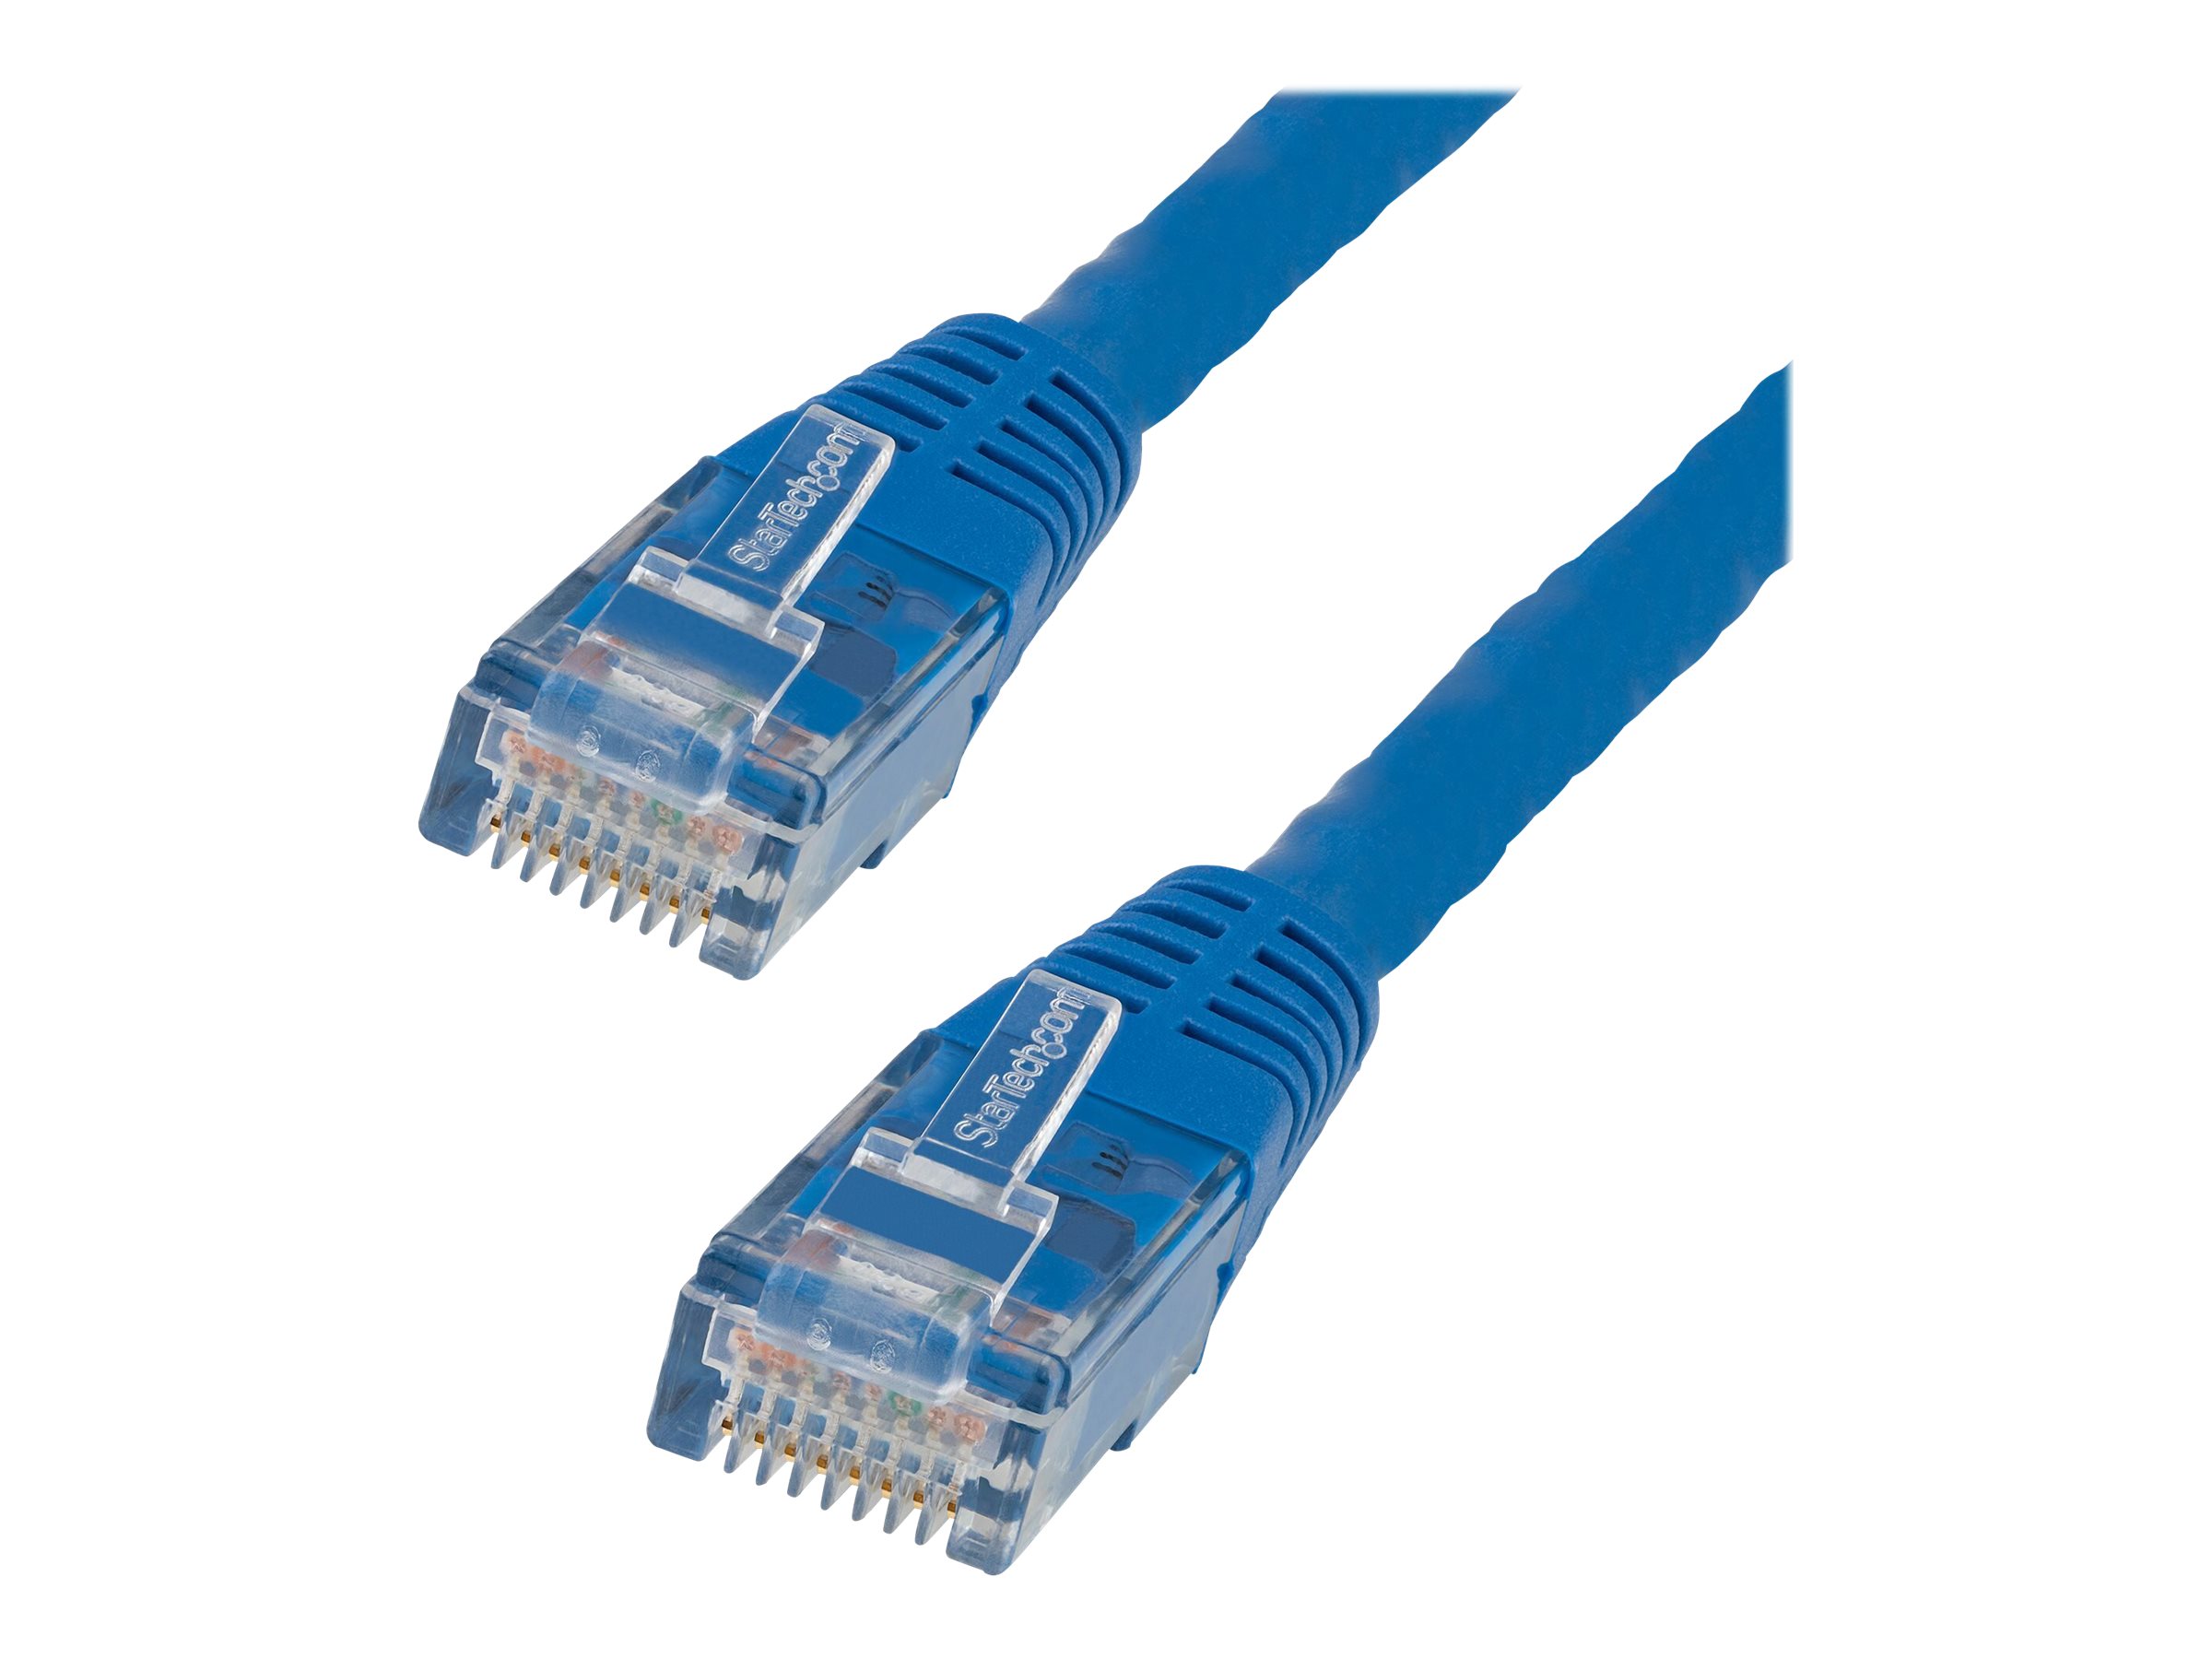 StarTech.com 100ft CAT6 Ethernet Cable, 10 Gigabit Molded RJ45 650MHz 100W PoE Patch Cord, CAT 6 10GbE UTP Network...